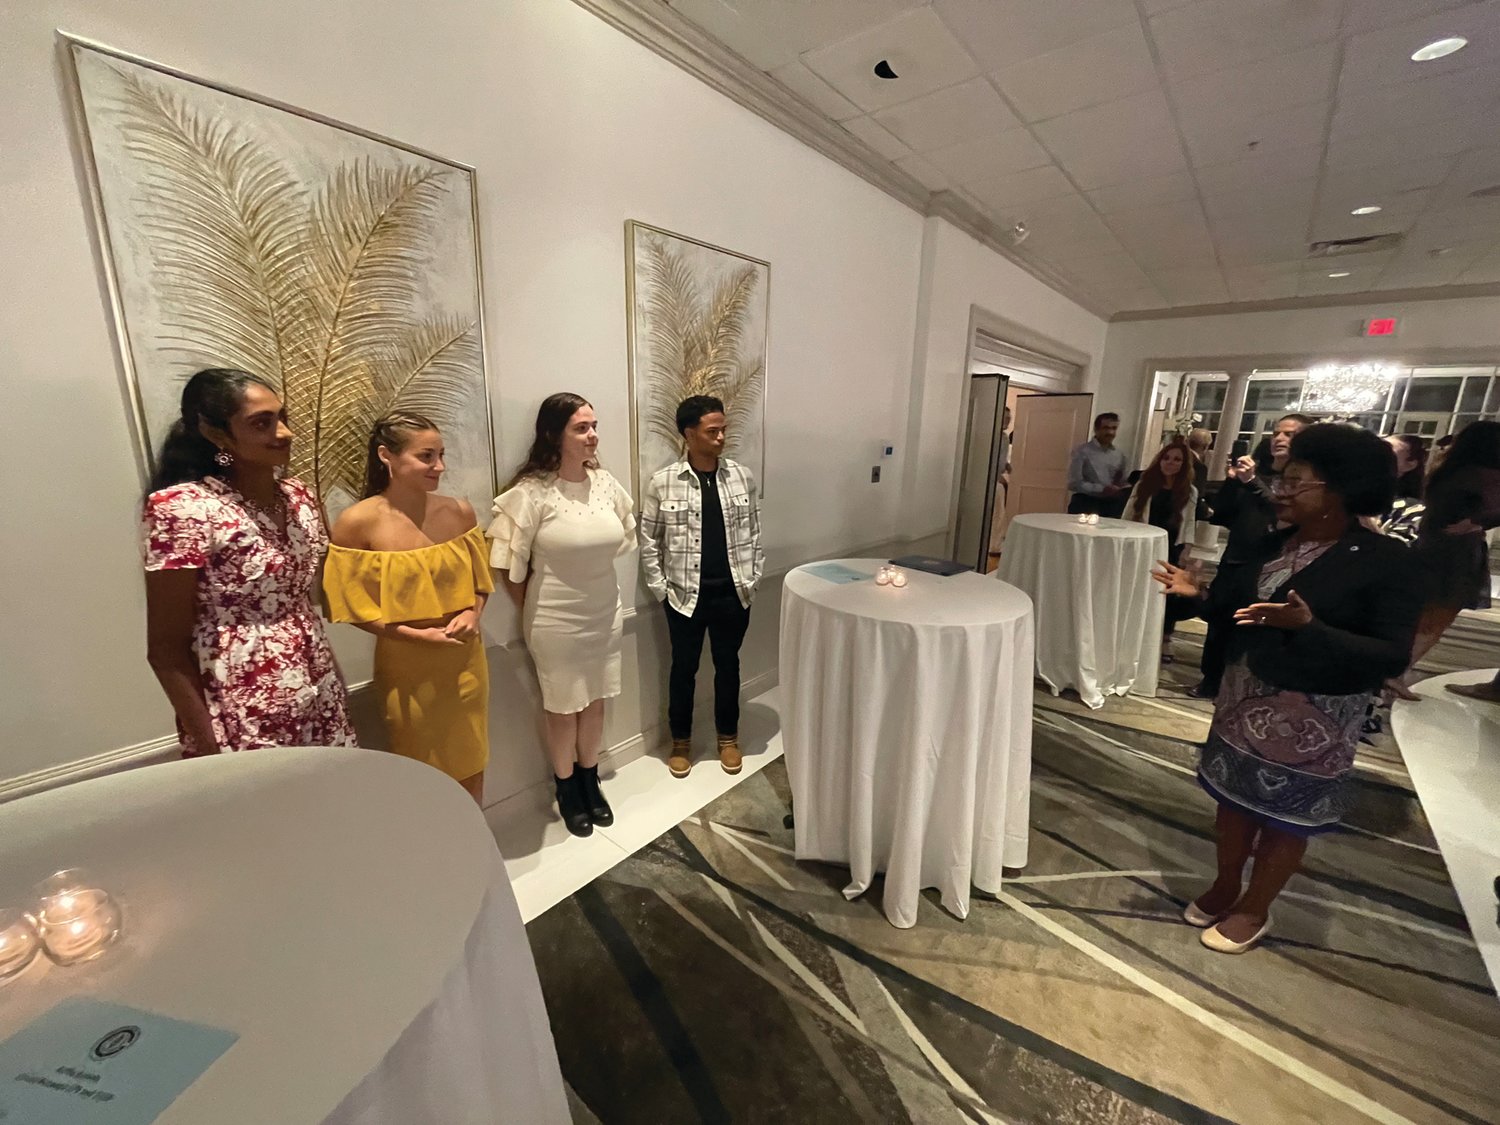 CONGRATULATIONS: Ward 2 City Councilwoman Aniece Germain, right, congratulates the four Hall of Fame scholarship recipients during an intermission at last week’s dinner. The scholars are, from left, Sanjana Ananthula, Mikaya Parente, Maria Silva and Xavier Pichardo.